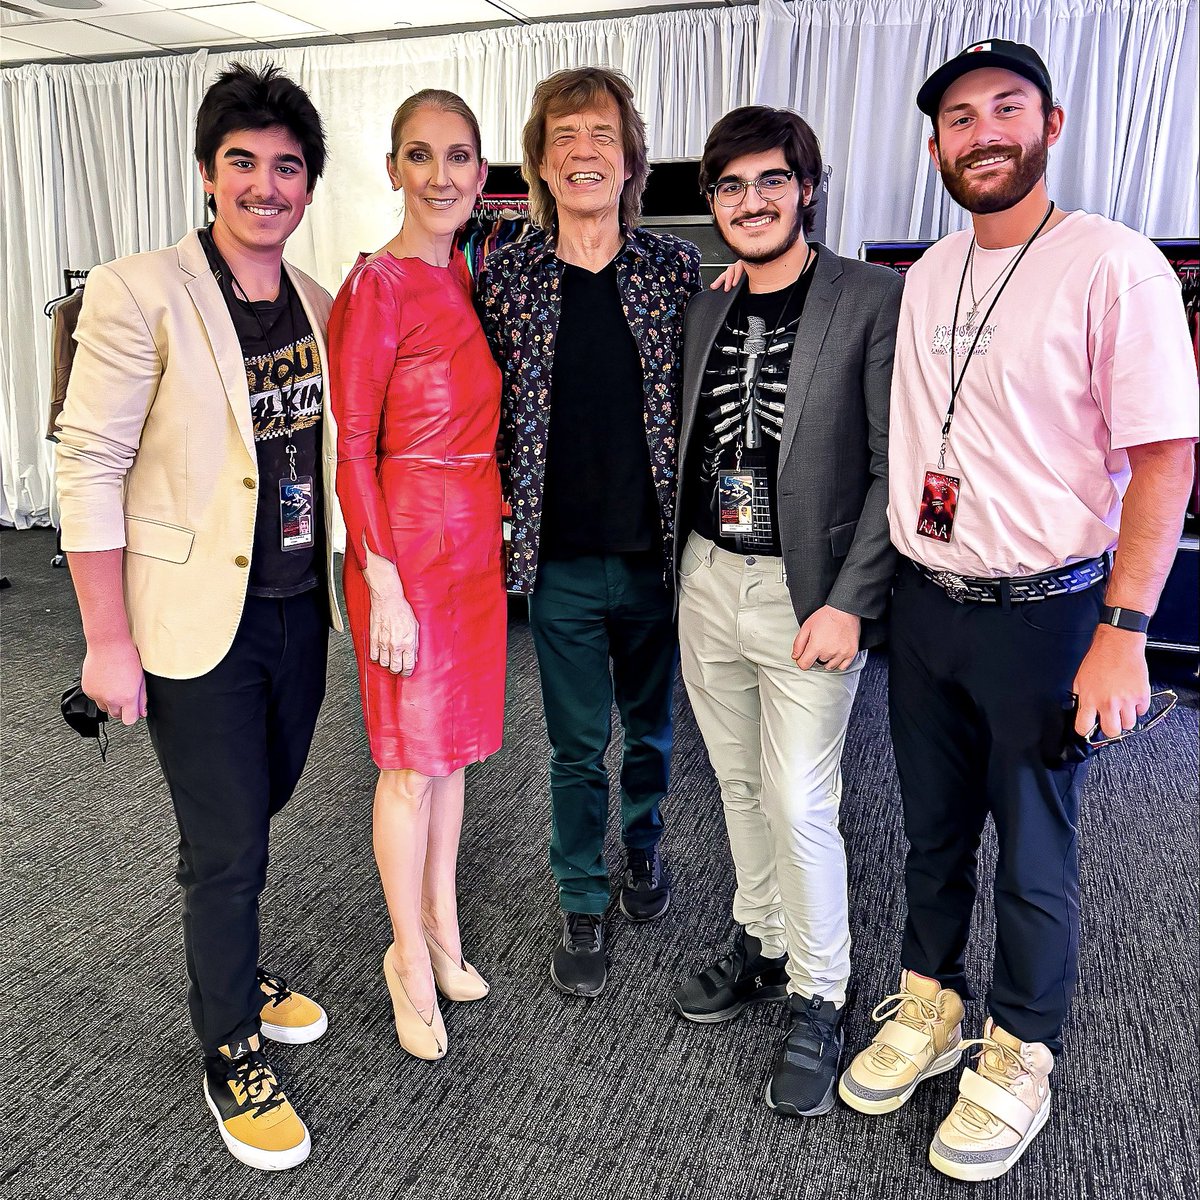 This past Saturday, I got a chance to catch the @RollingStones in concert on their #HackneyDiamonds Tour at @AllegiantStadm in Vegas. What an incredible show! A very special thanks to @MickJagger for warmly welcoming my family. You got us rocking! 
-Celine xx...